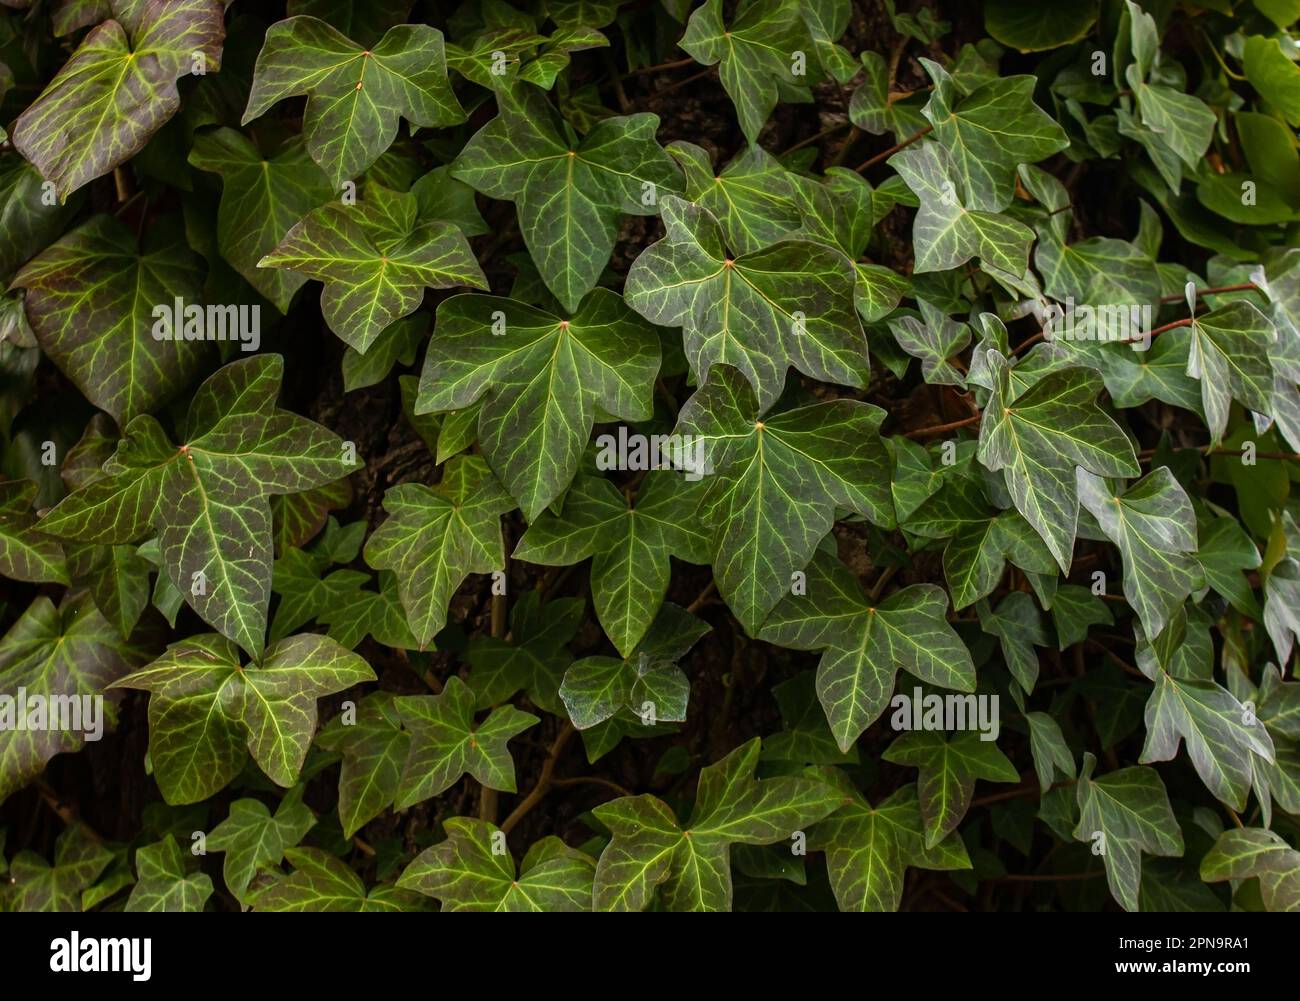 A wall of common Ivy. Usuable as a background or texture. Also known as European ivy, english ivy or ivy. (Hedera helix) Stock Photo